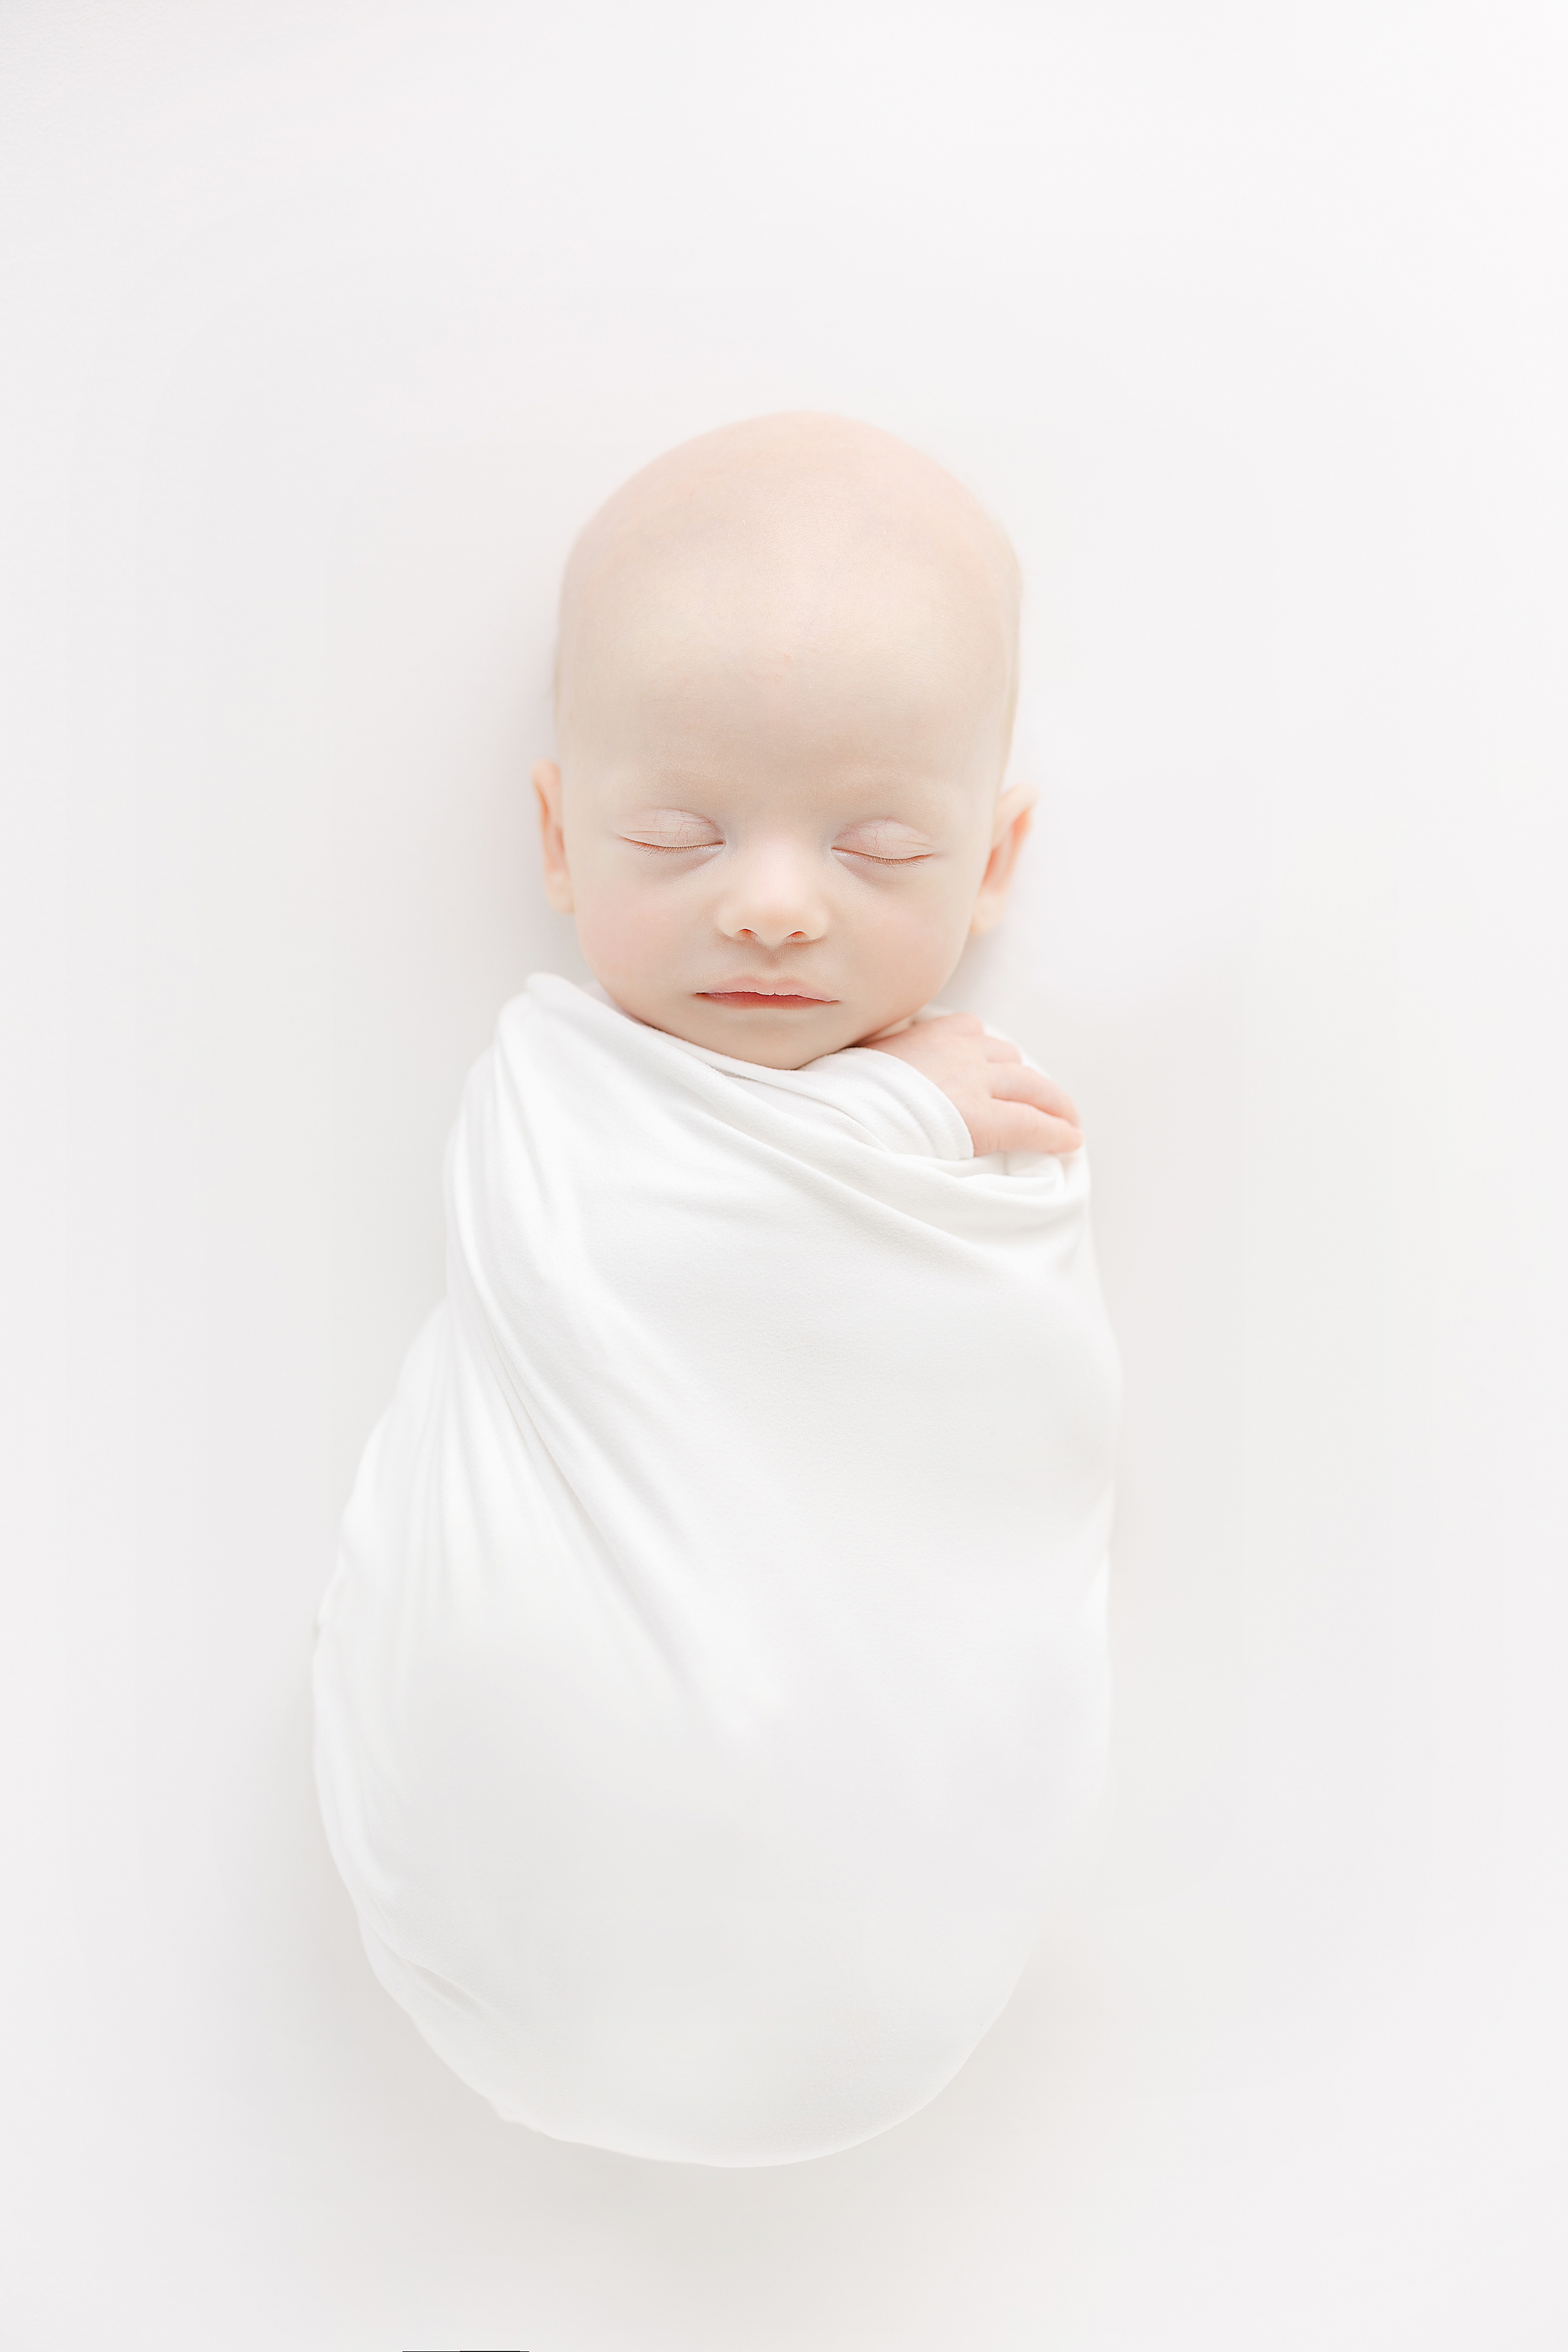 Light and airy all white newborn portrait of a baby boy.